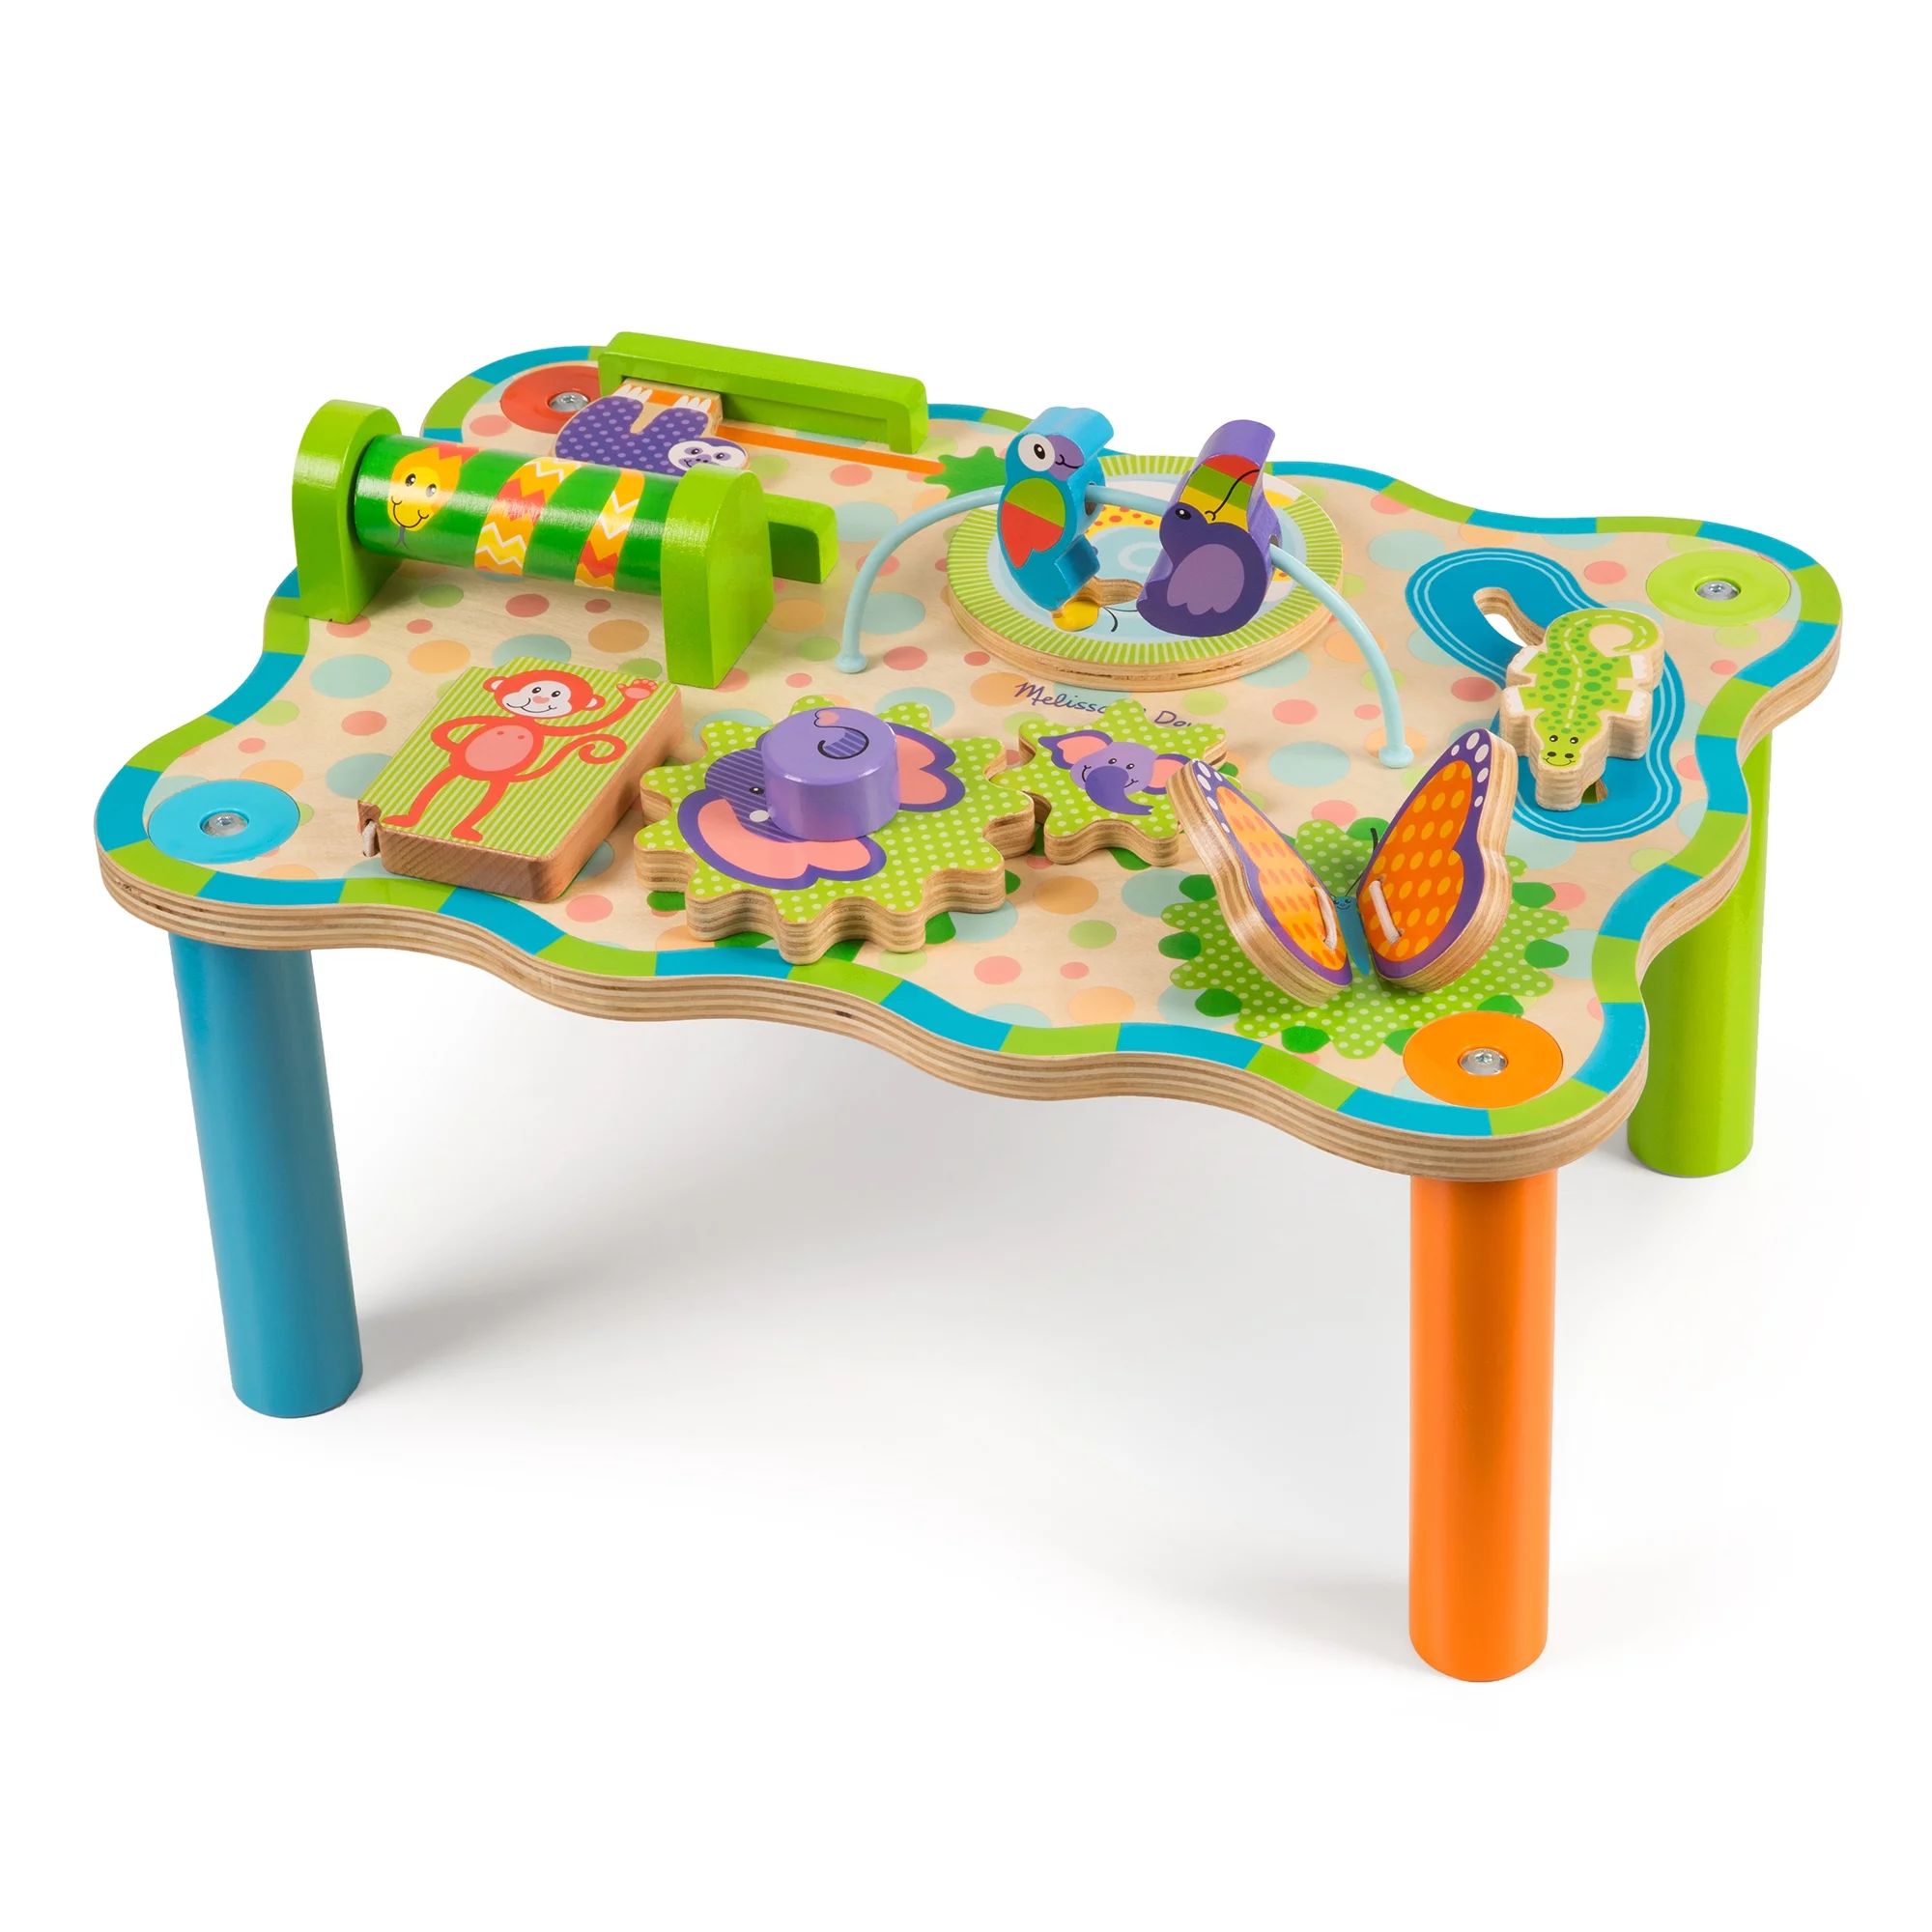 Melissa & Doug First Play Children’s Jungle Wooden Activity Table for Toddlers | Walmart (US)